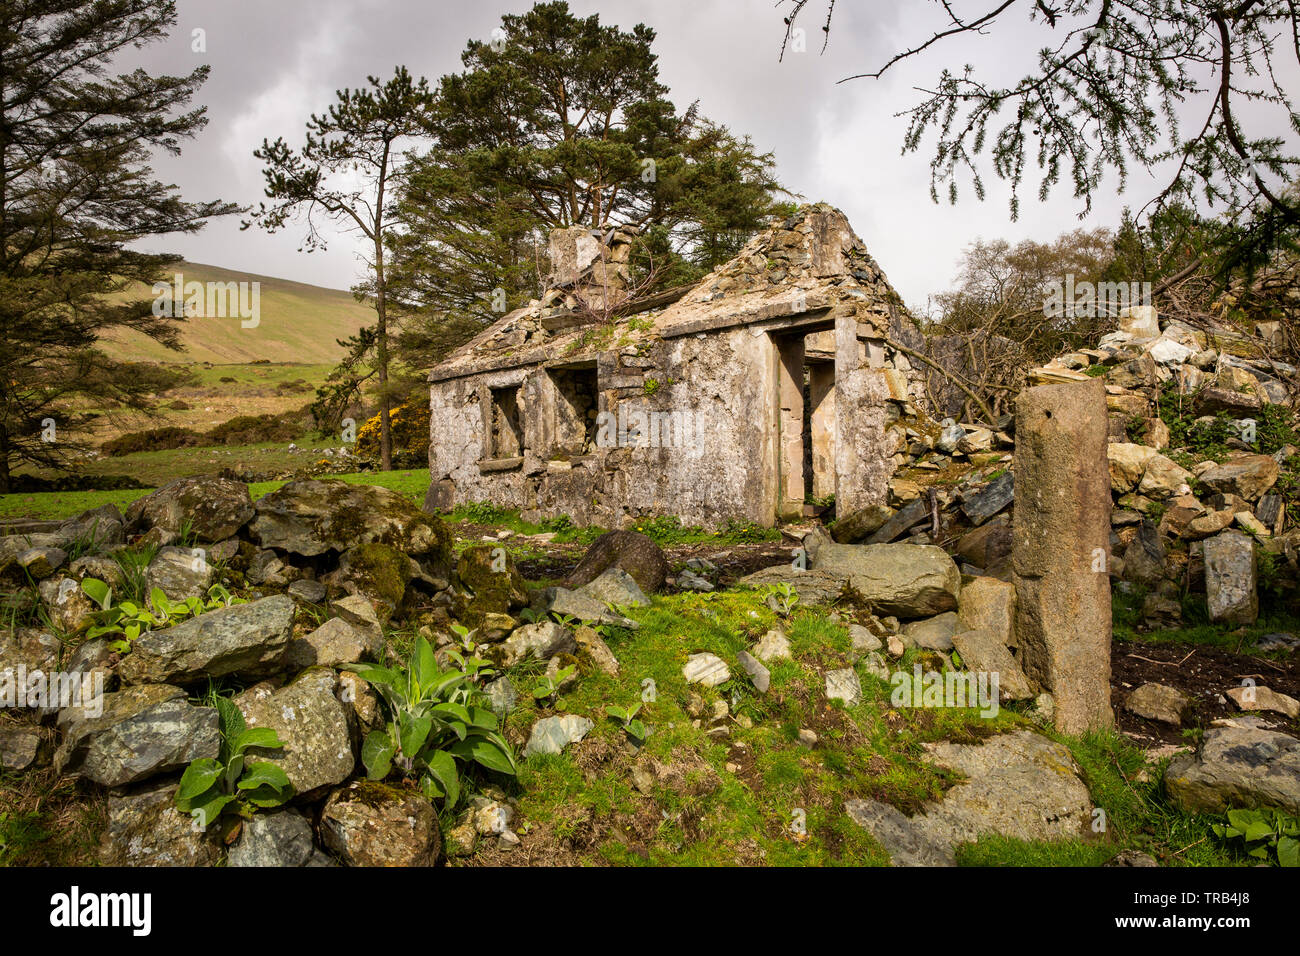 Northern Ireland, Co Down, Low Mournes, Curraghknockadoo, abandoned rural cottage in mountainside location Stock Photo